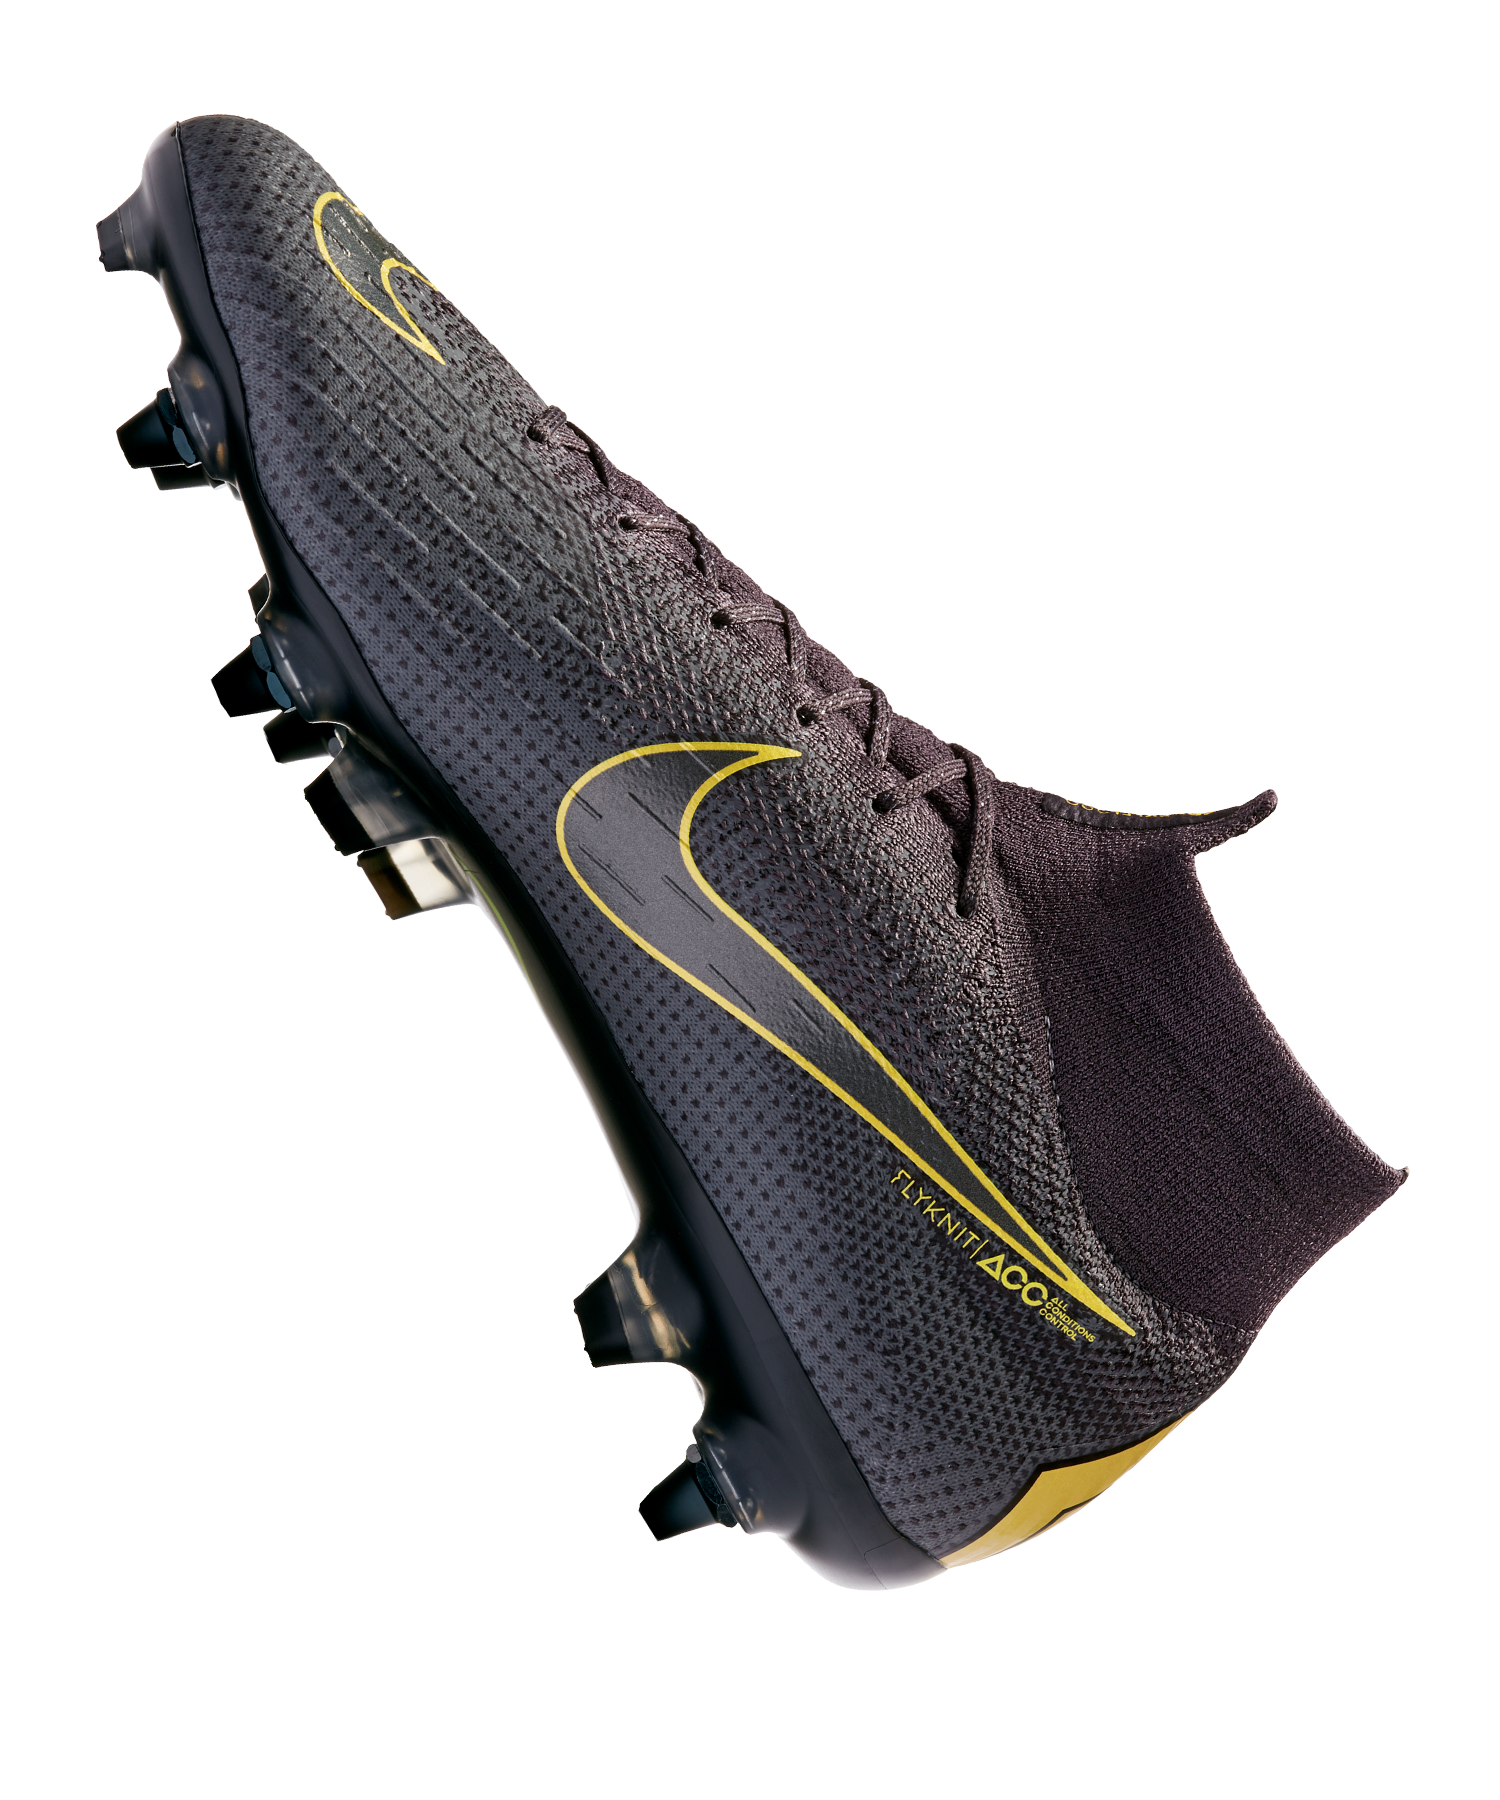 Nike Mercurial Superfly Pro MDS FG $ 159.95 $ 119.99